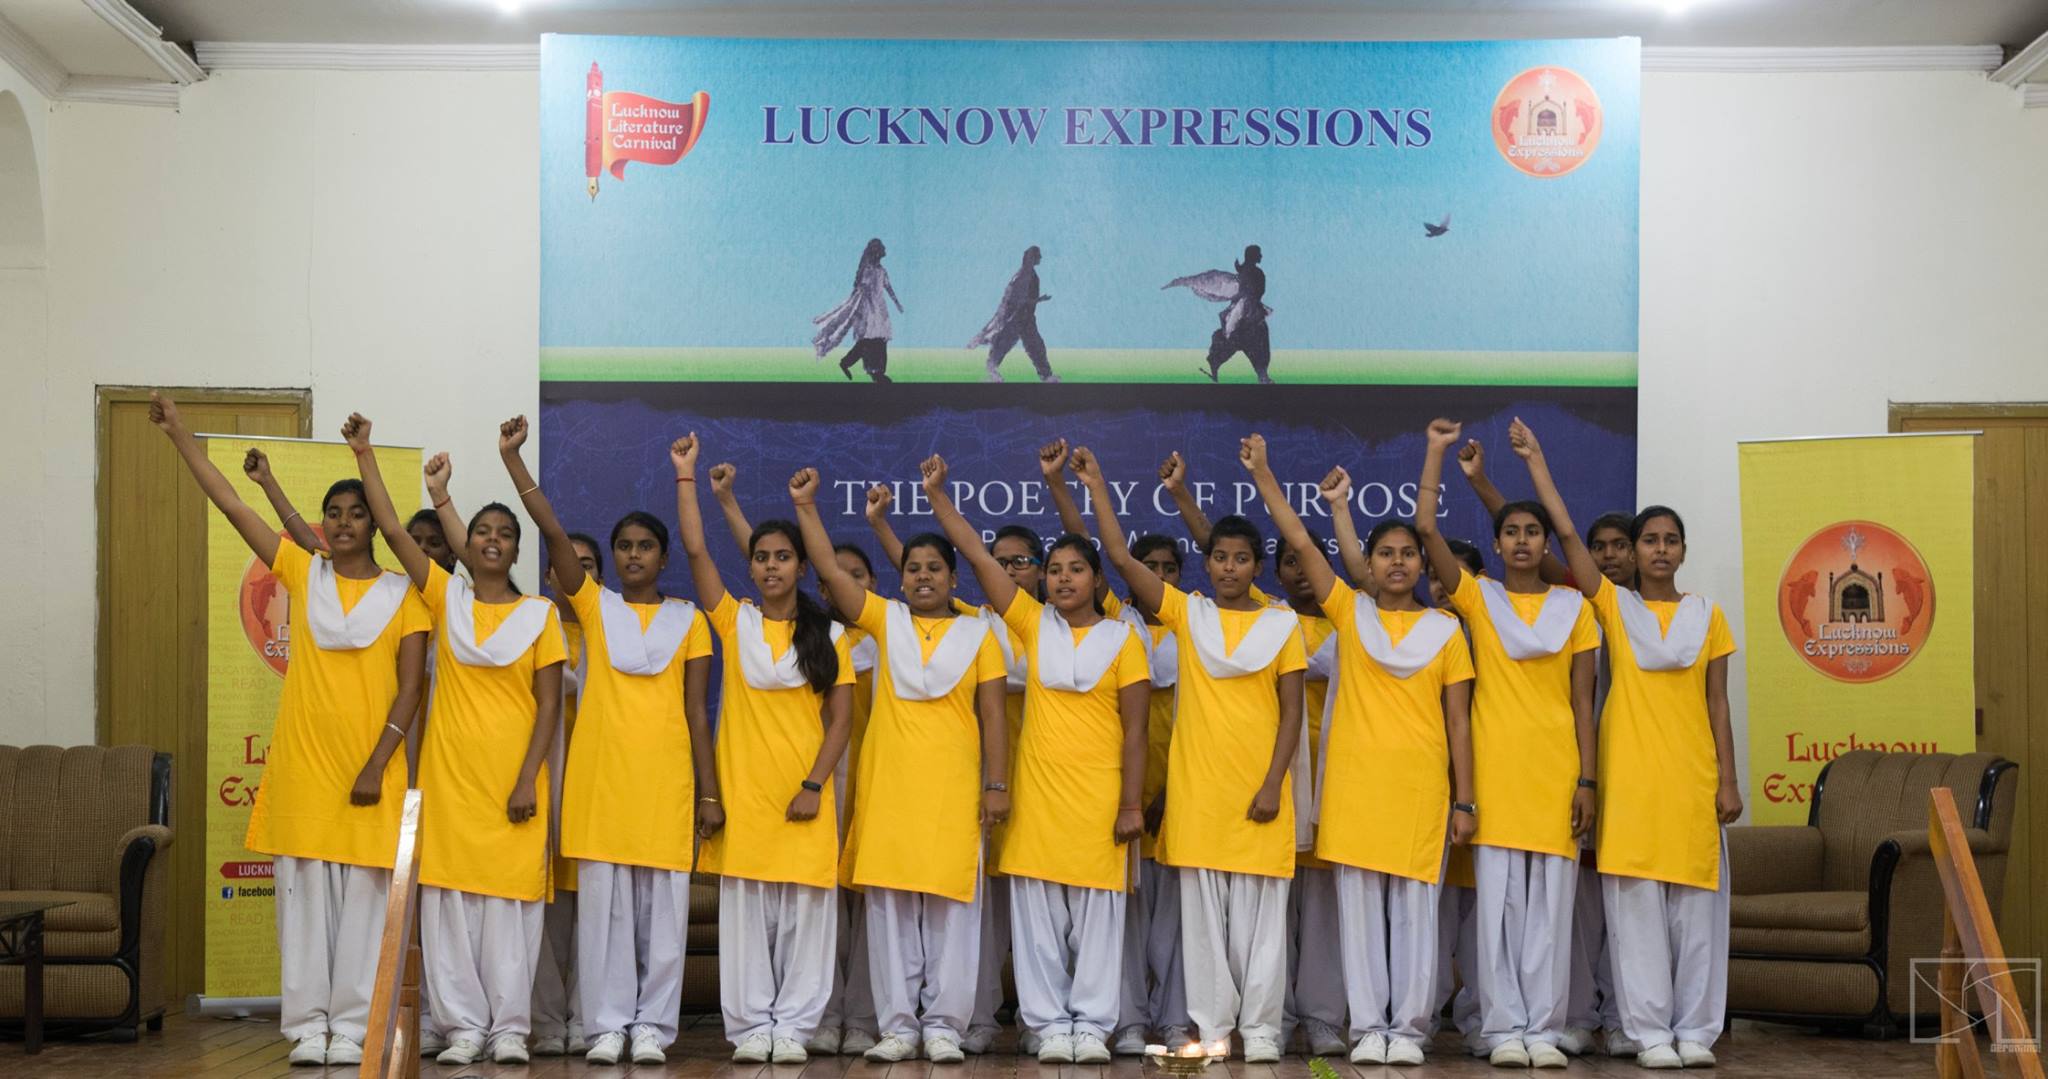 Girls from Lucknow’s Prerna school are given lessons in feminism from an early age so that they develop a sense of self and gain confidence to voice their aspirations for the future.